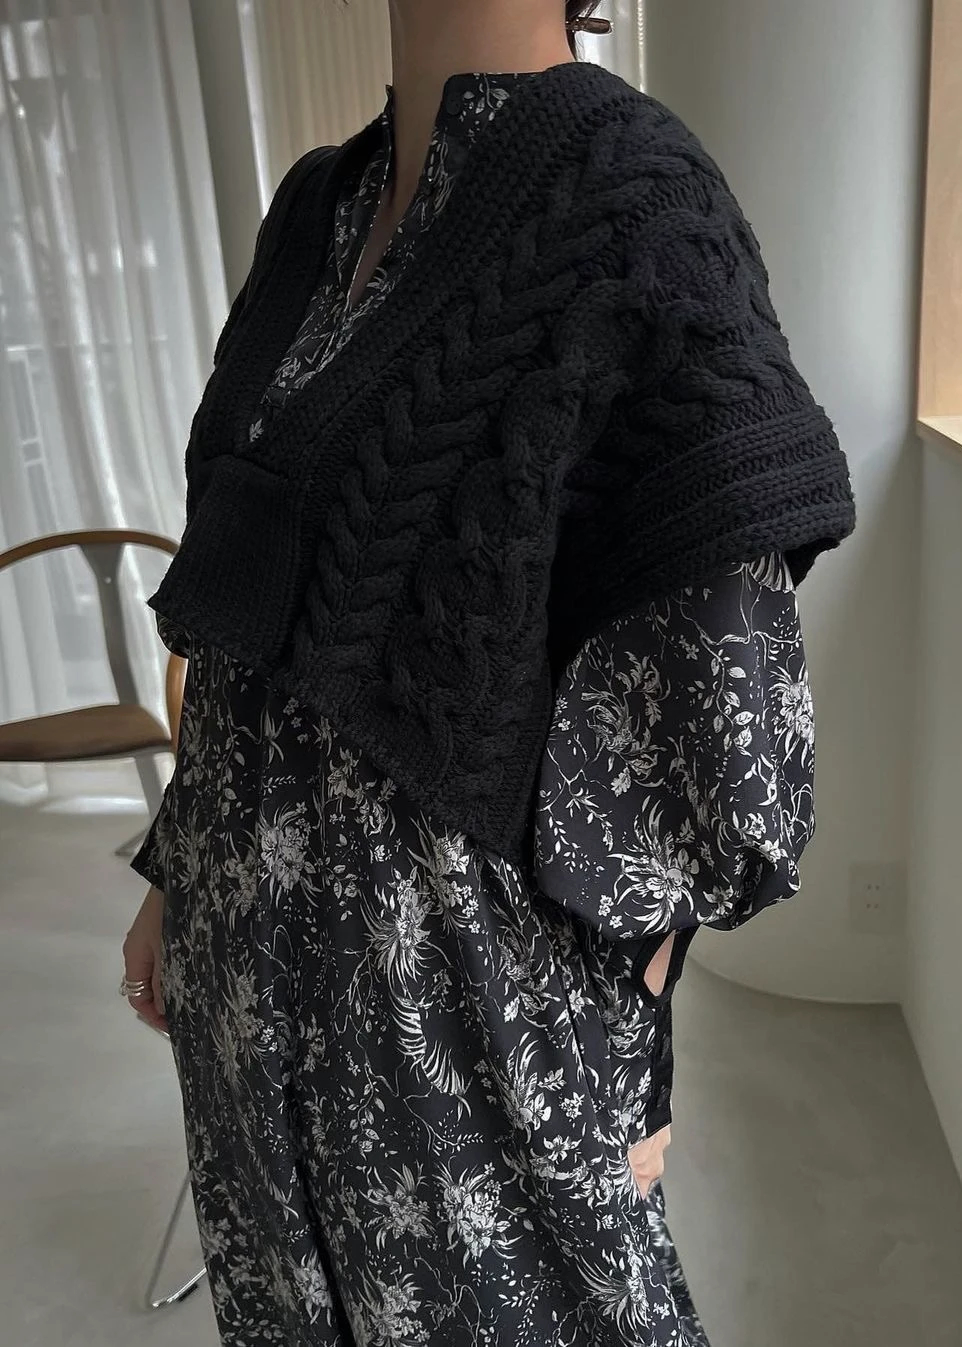 cable multi way knit vest / willfully（ウィルフリー）のknit通販